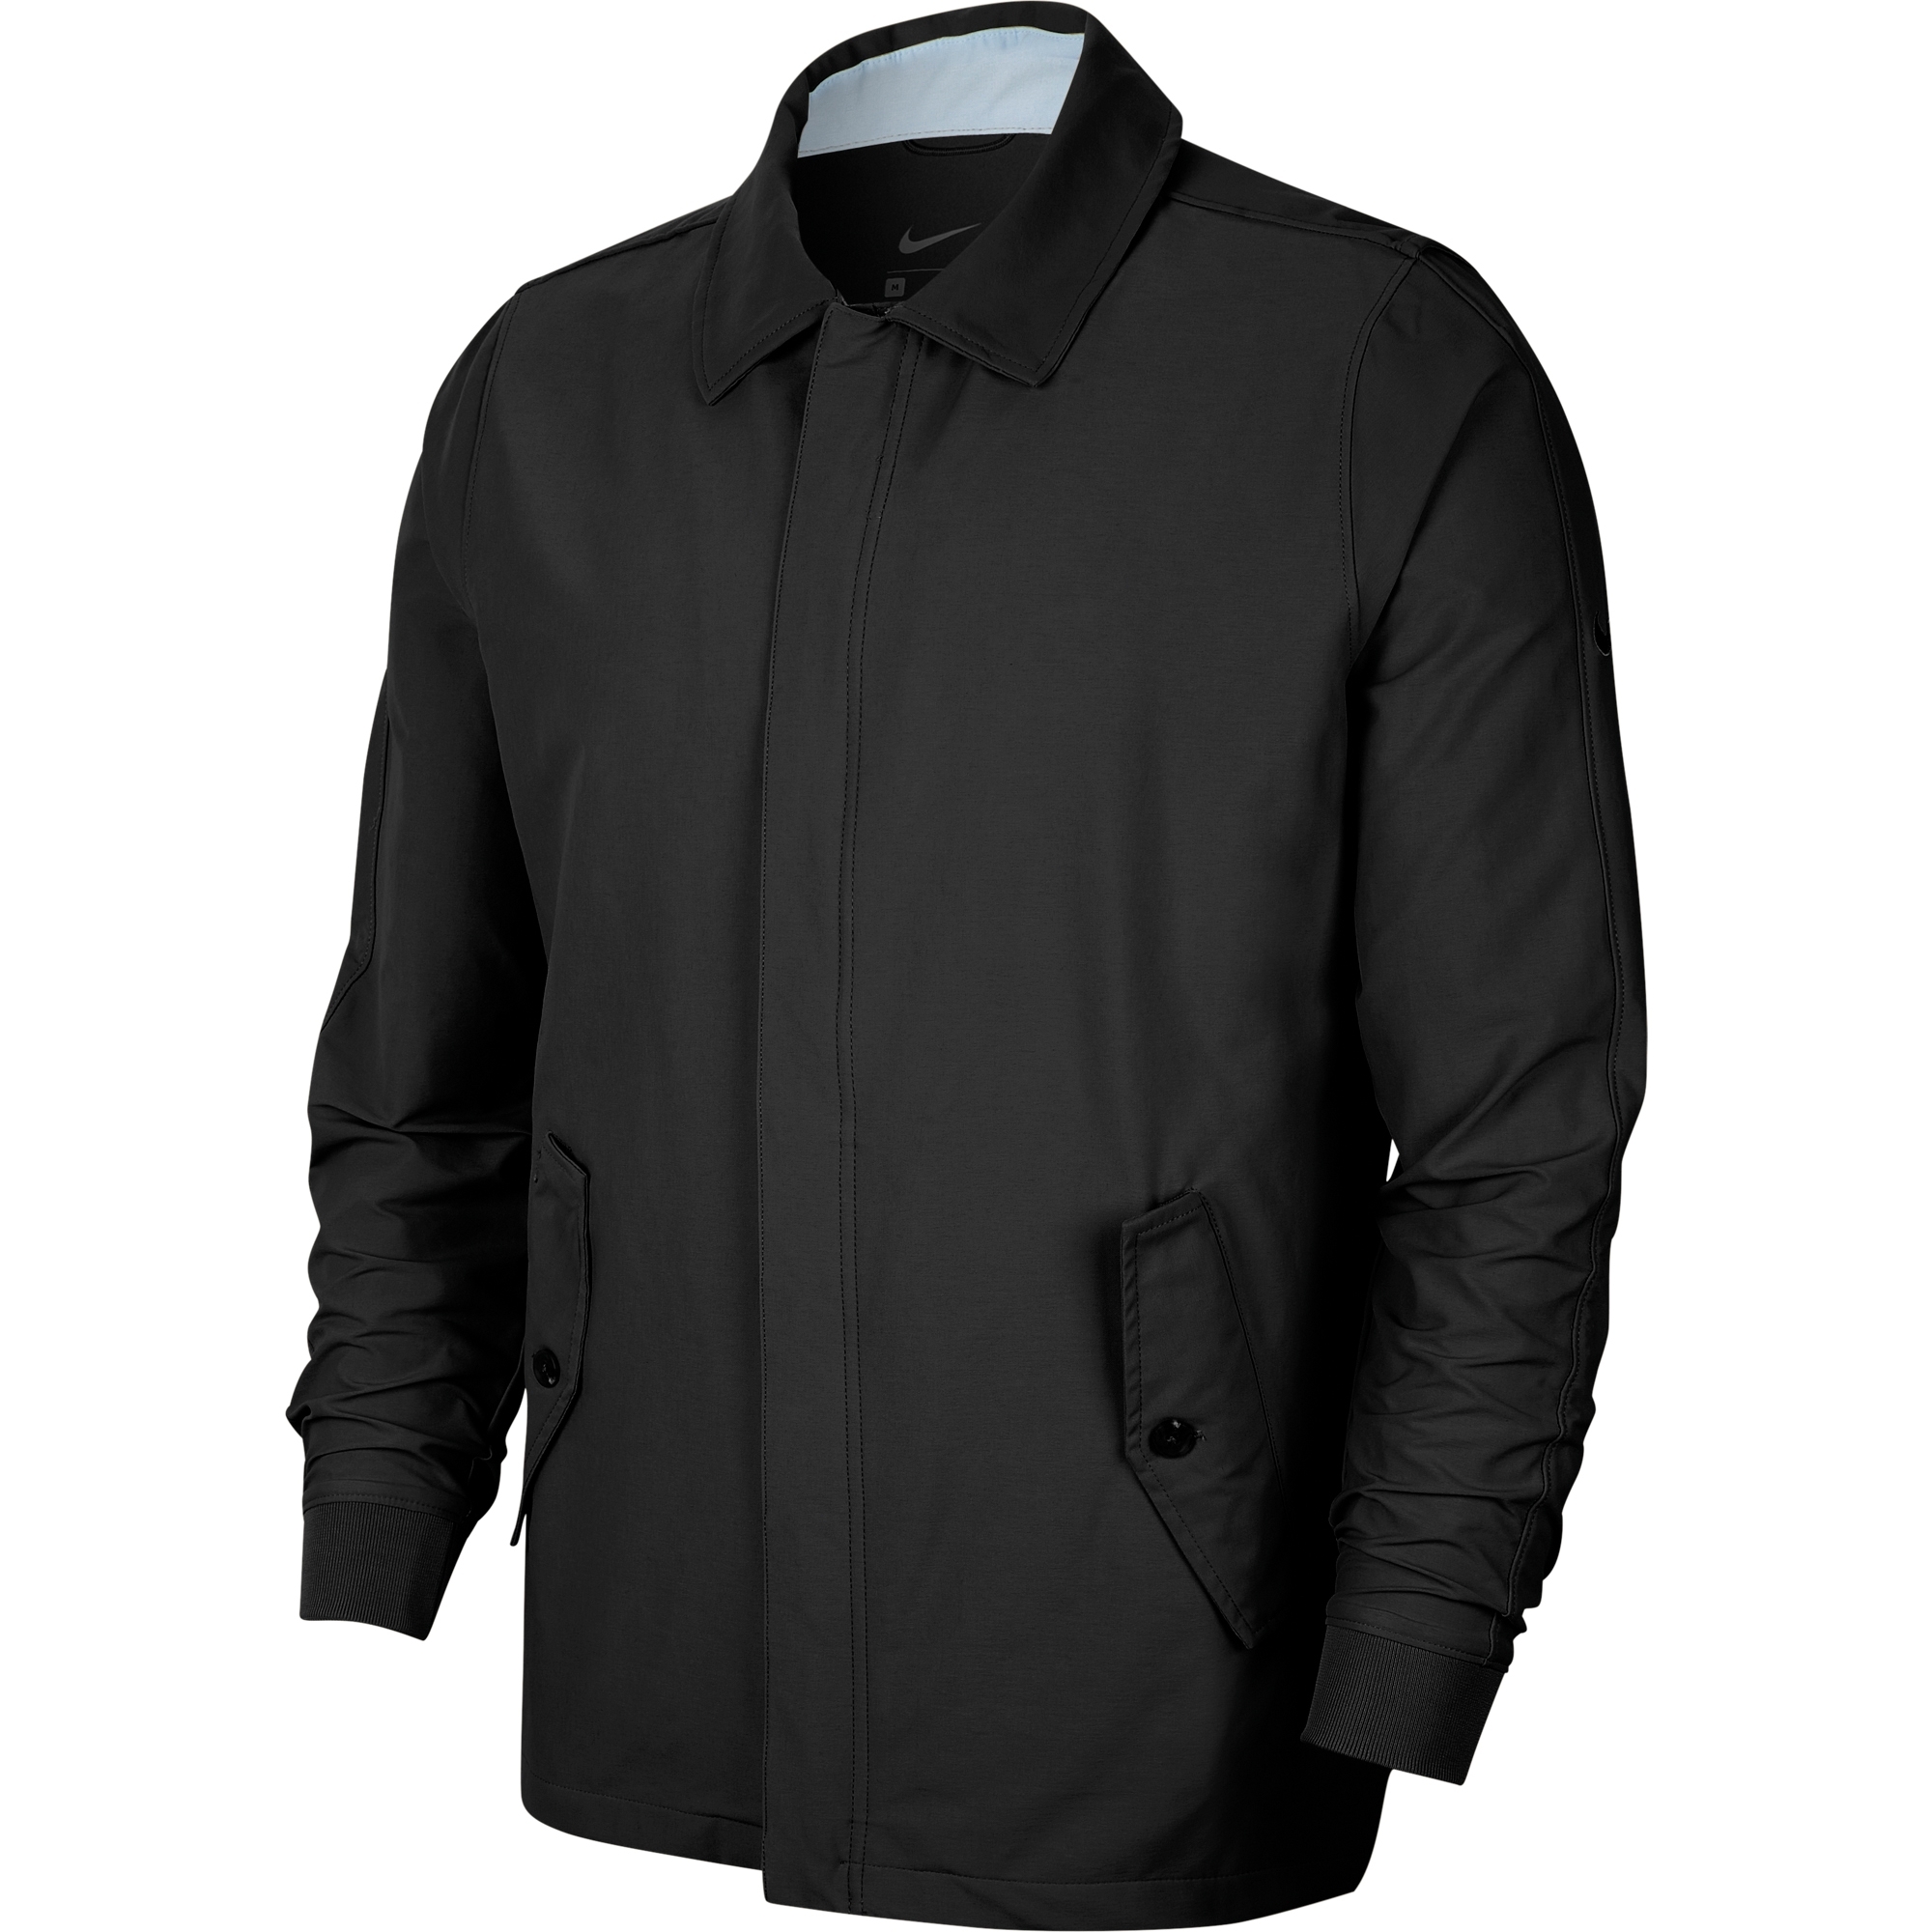 Nike Mens Repel Players Water Repellent Active Golf Jacket M- Chest 37.5-41'